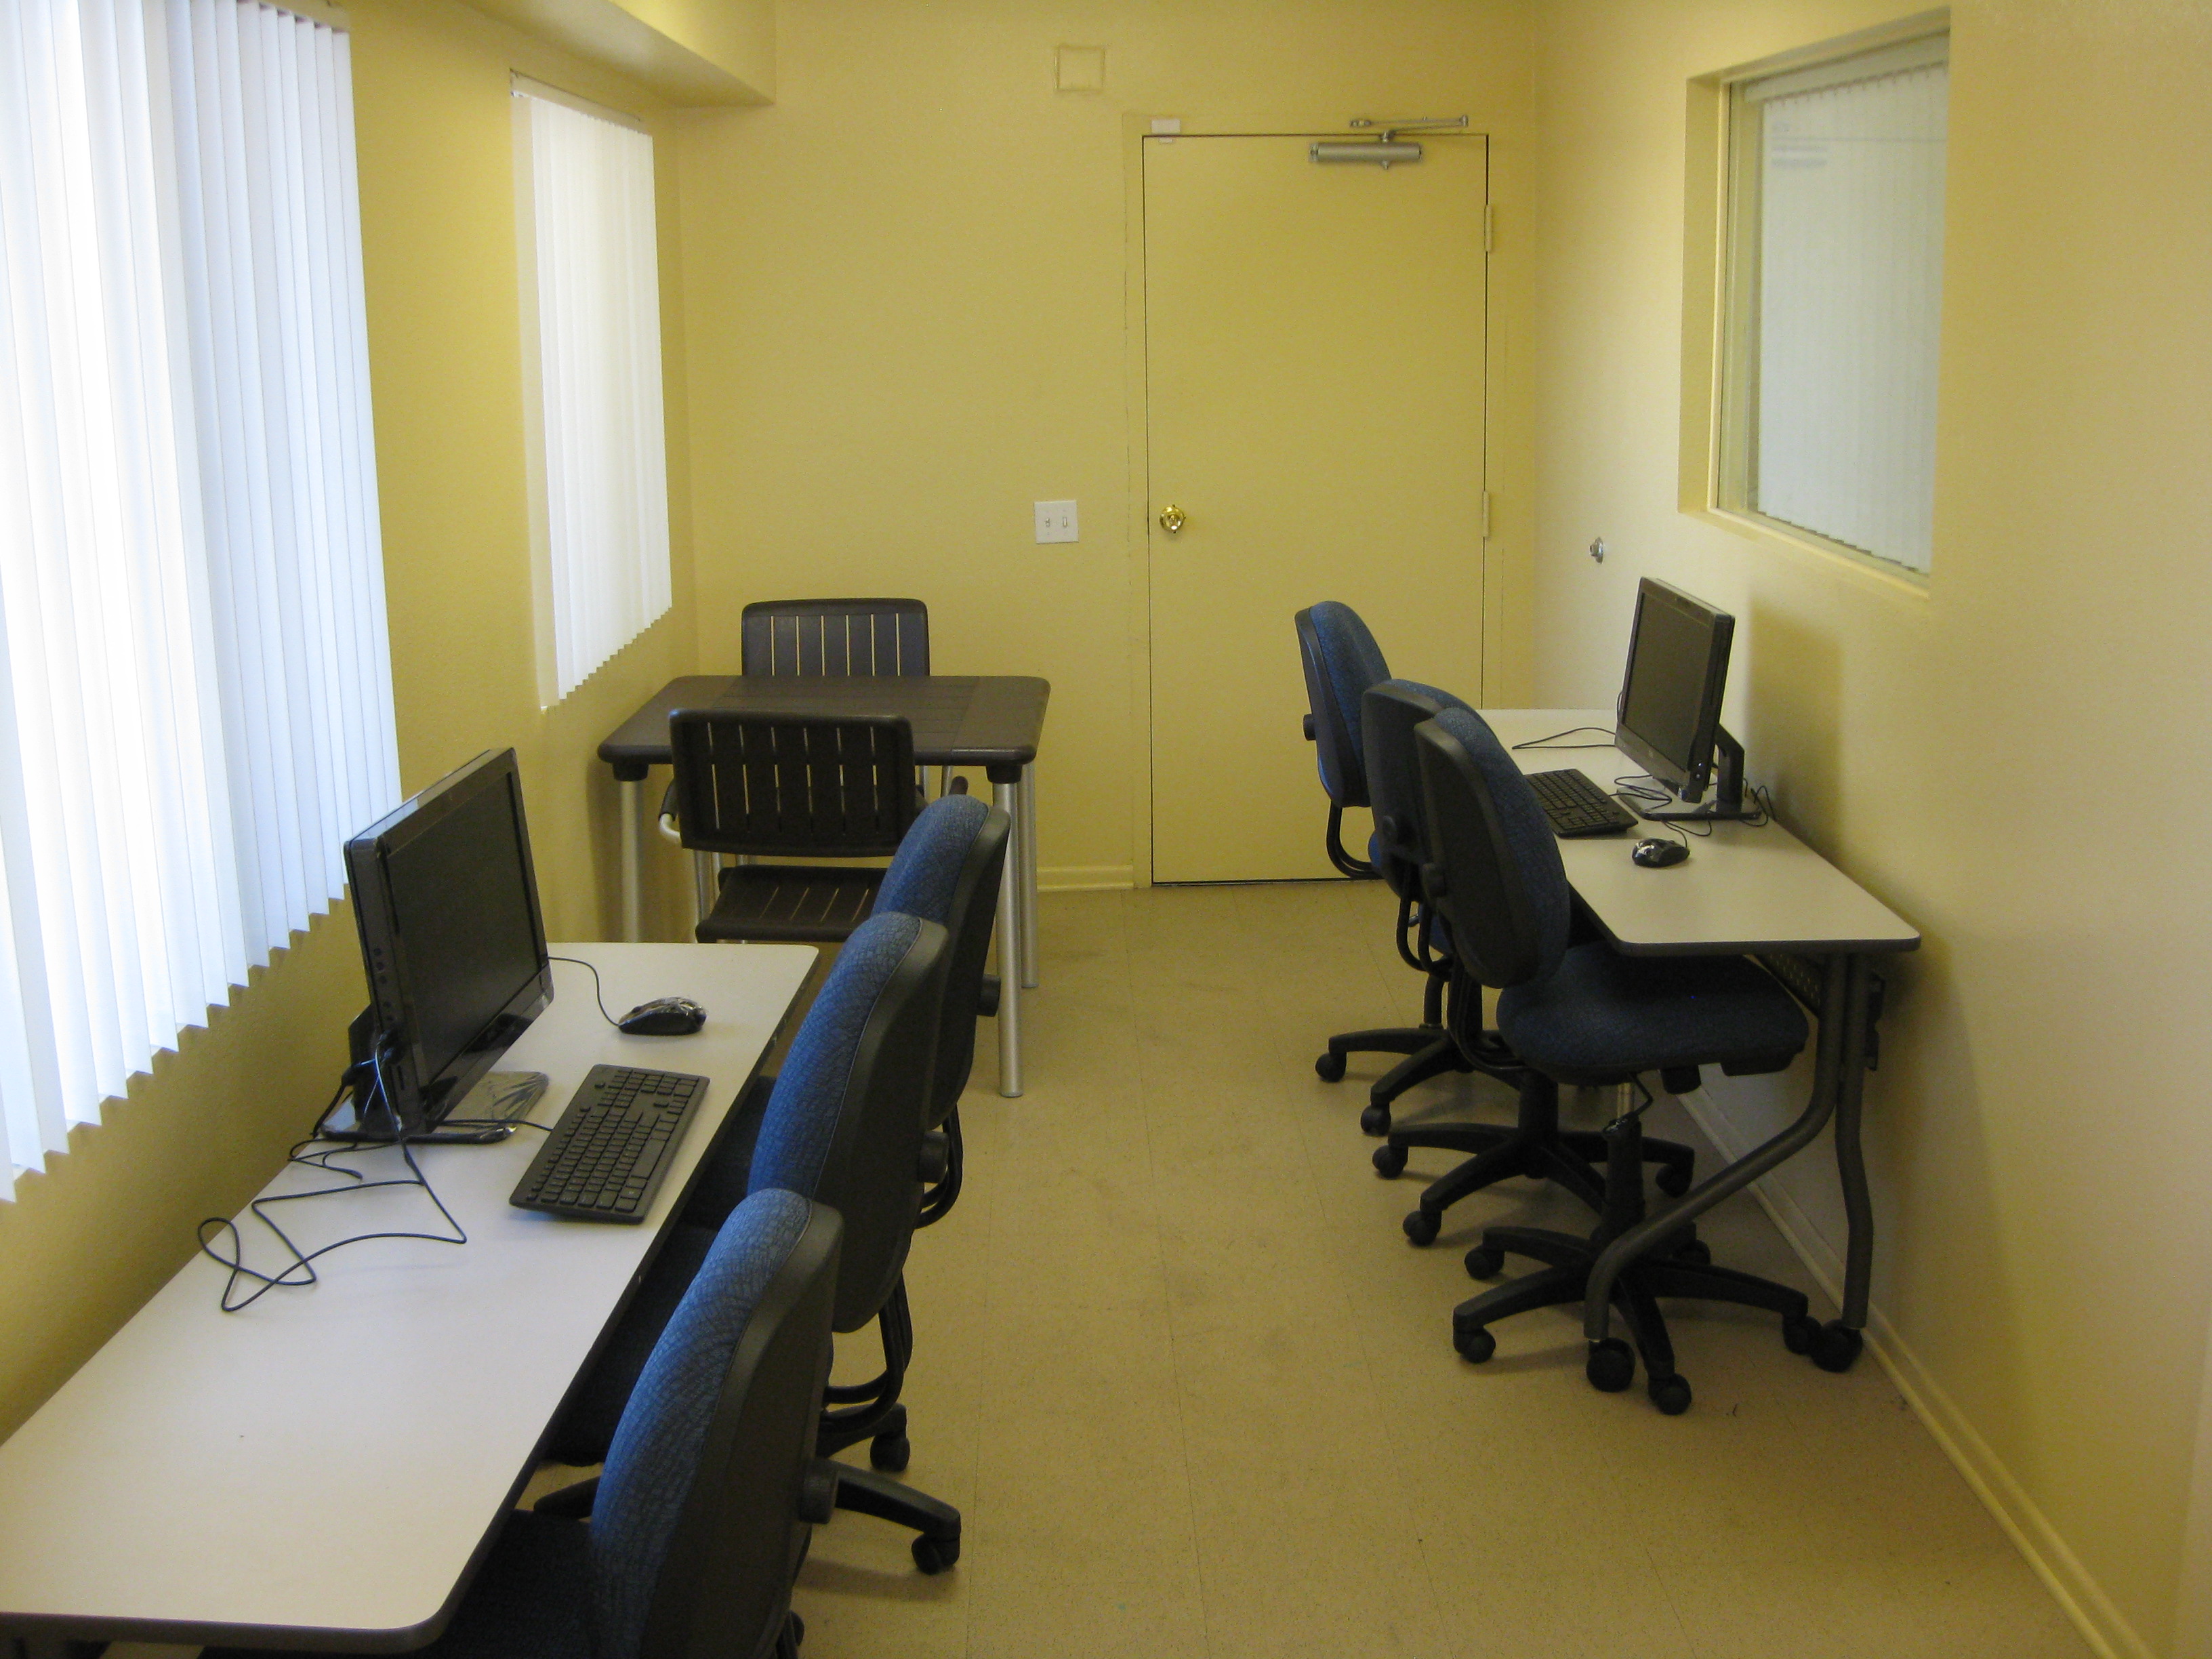 Paradise arms computer room. narrow room with two long tables with desktop computer and seating